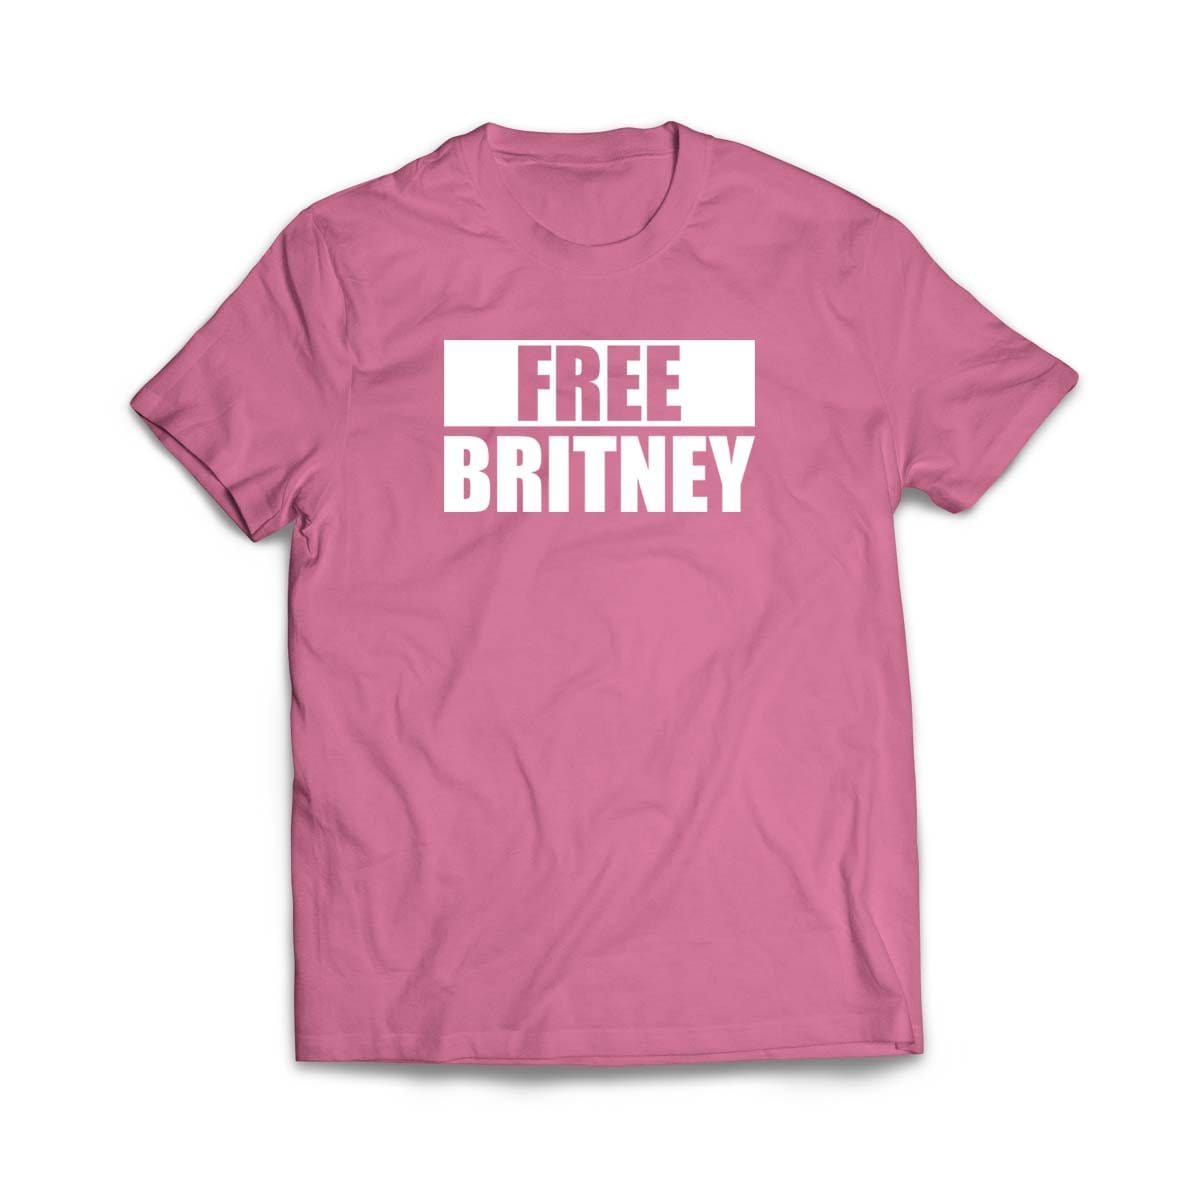 NEXT LEVEL APPAREL - #FREE BRITNEY WOMENS T-SHIRT - PINK-SIZE M